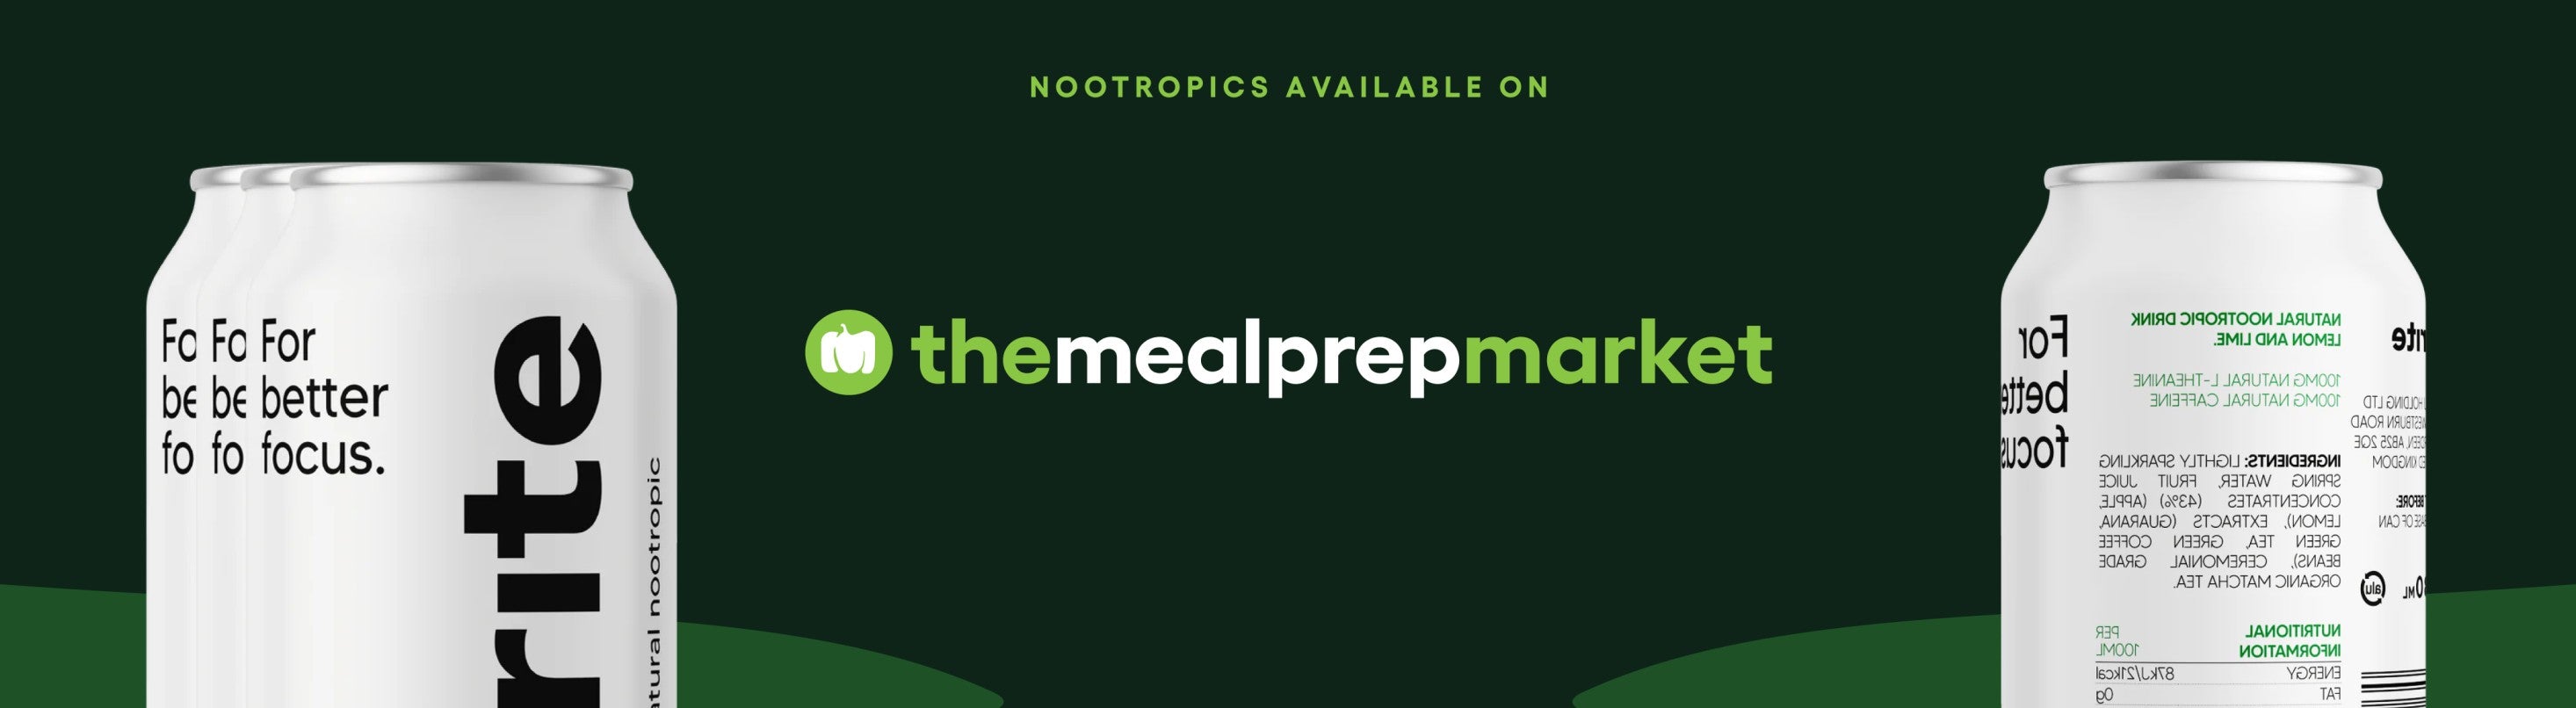 Nootropics Available on The Meal Prep Market